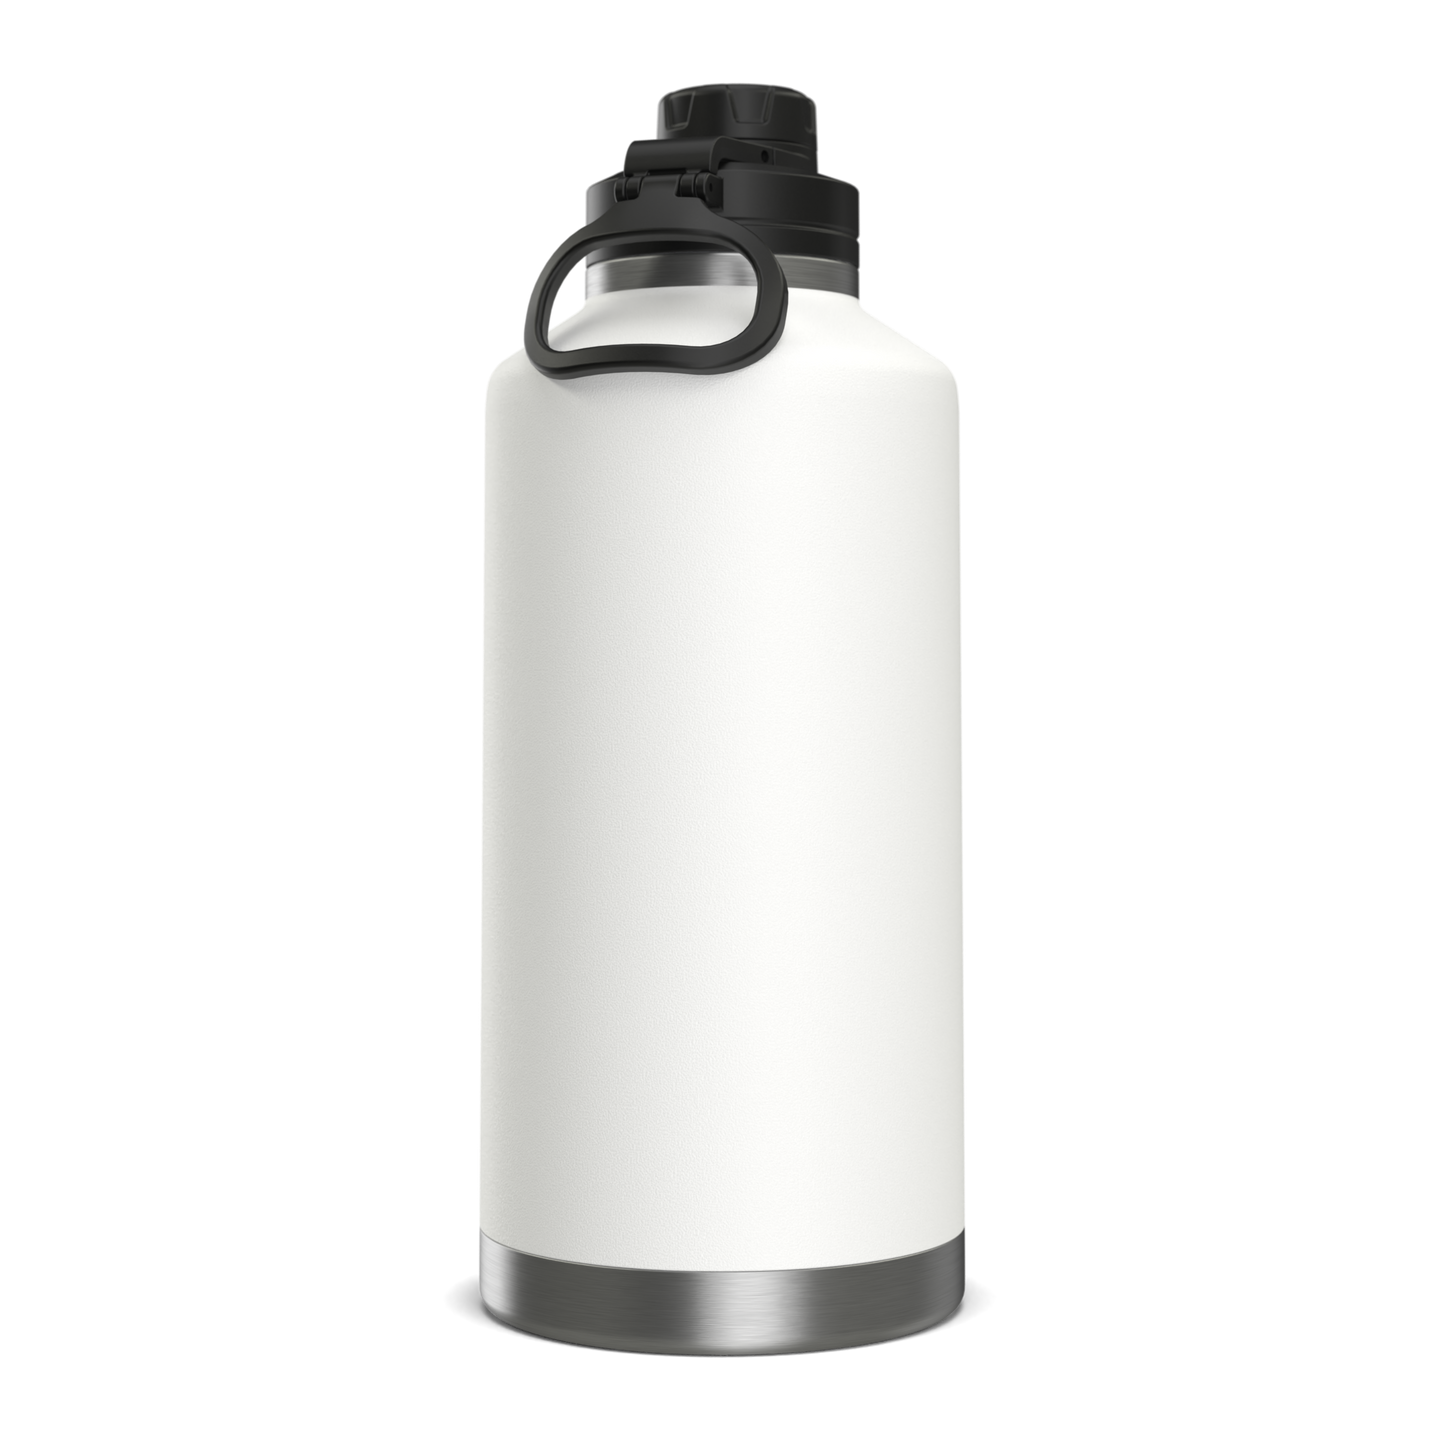 72oz Stainless Steel Insulated Water Bottle With Flexible Chug Lid- White